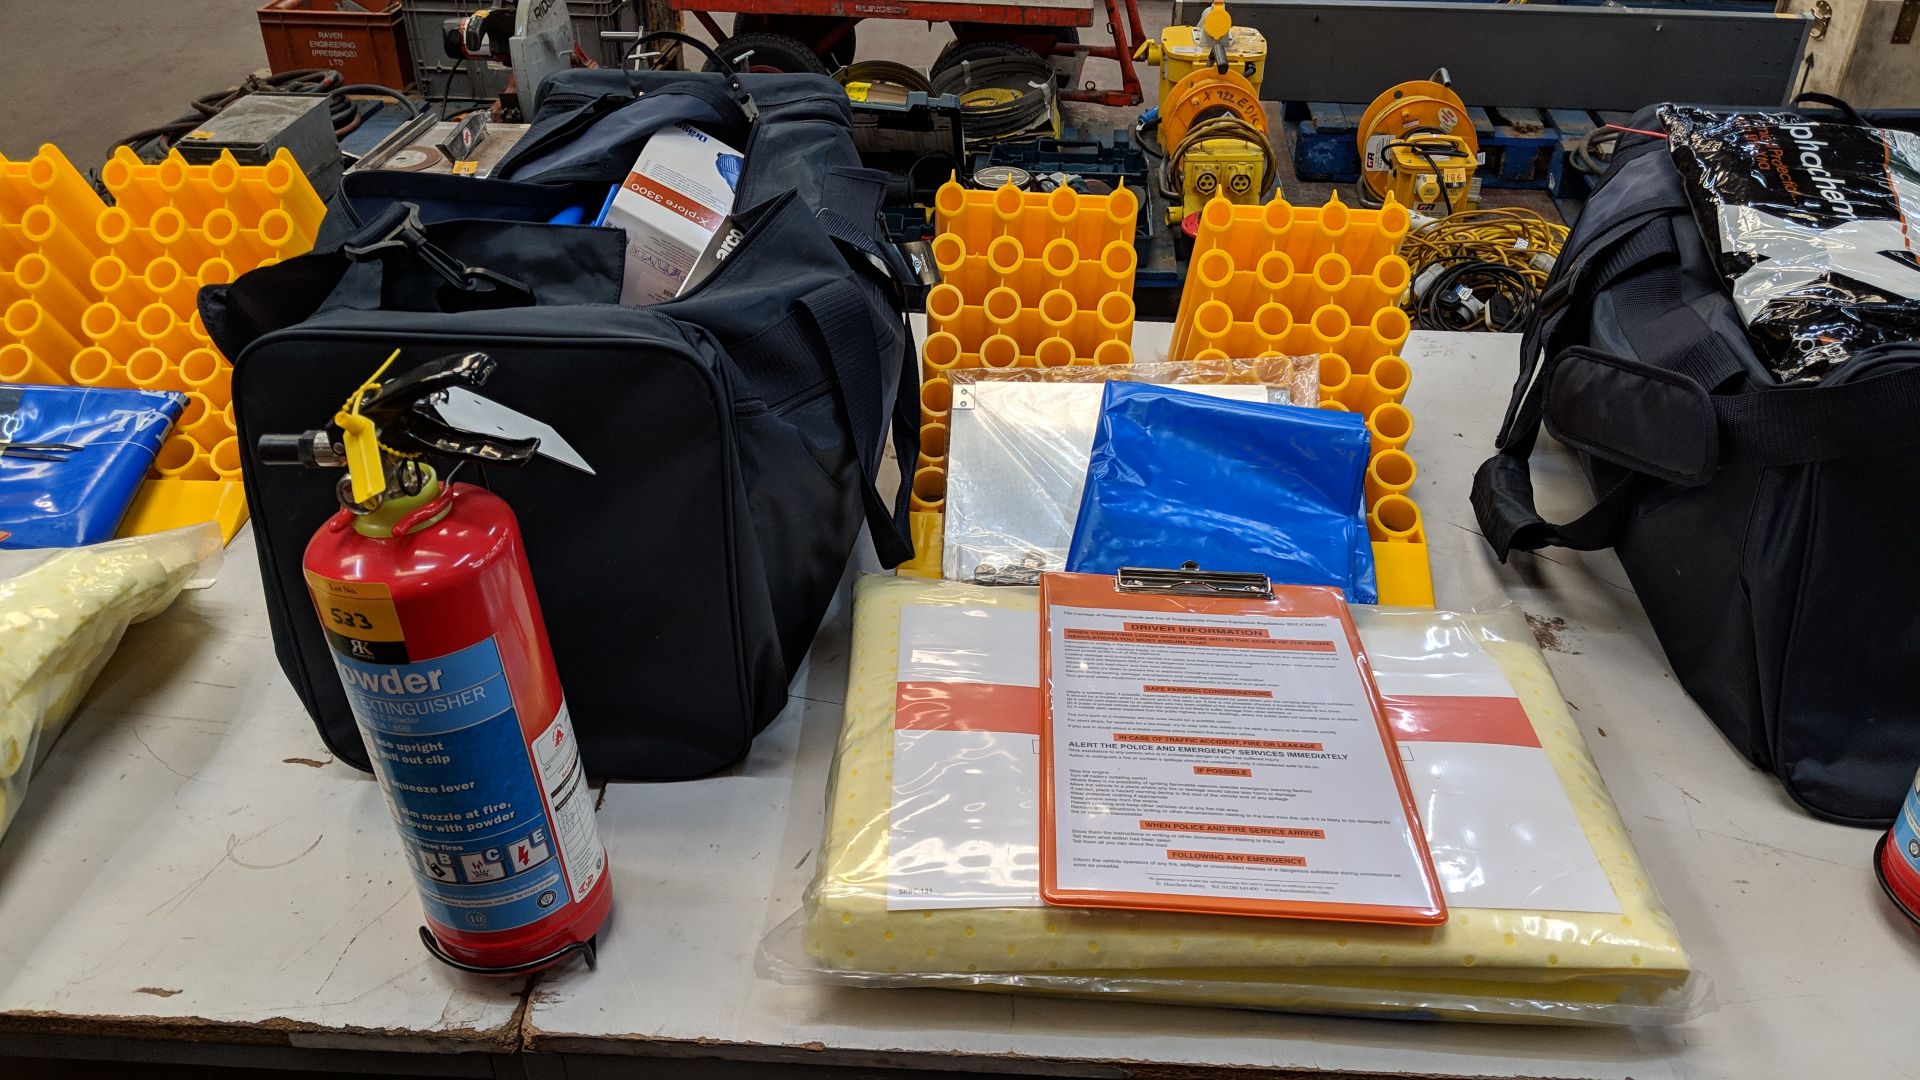 Vehicle disaster kit comprising bag with wide variety of emergency equipment plus fire extinguisher,